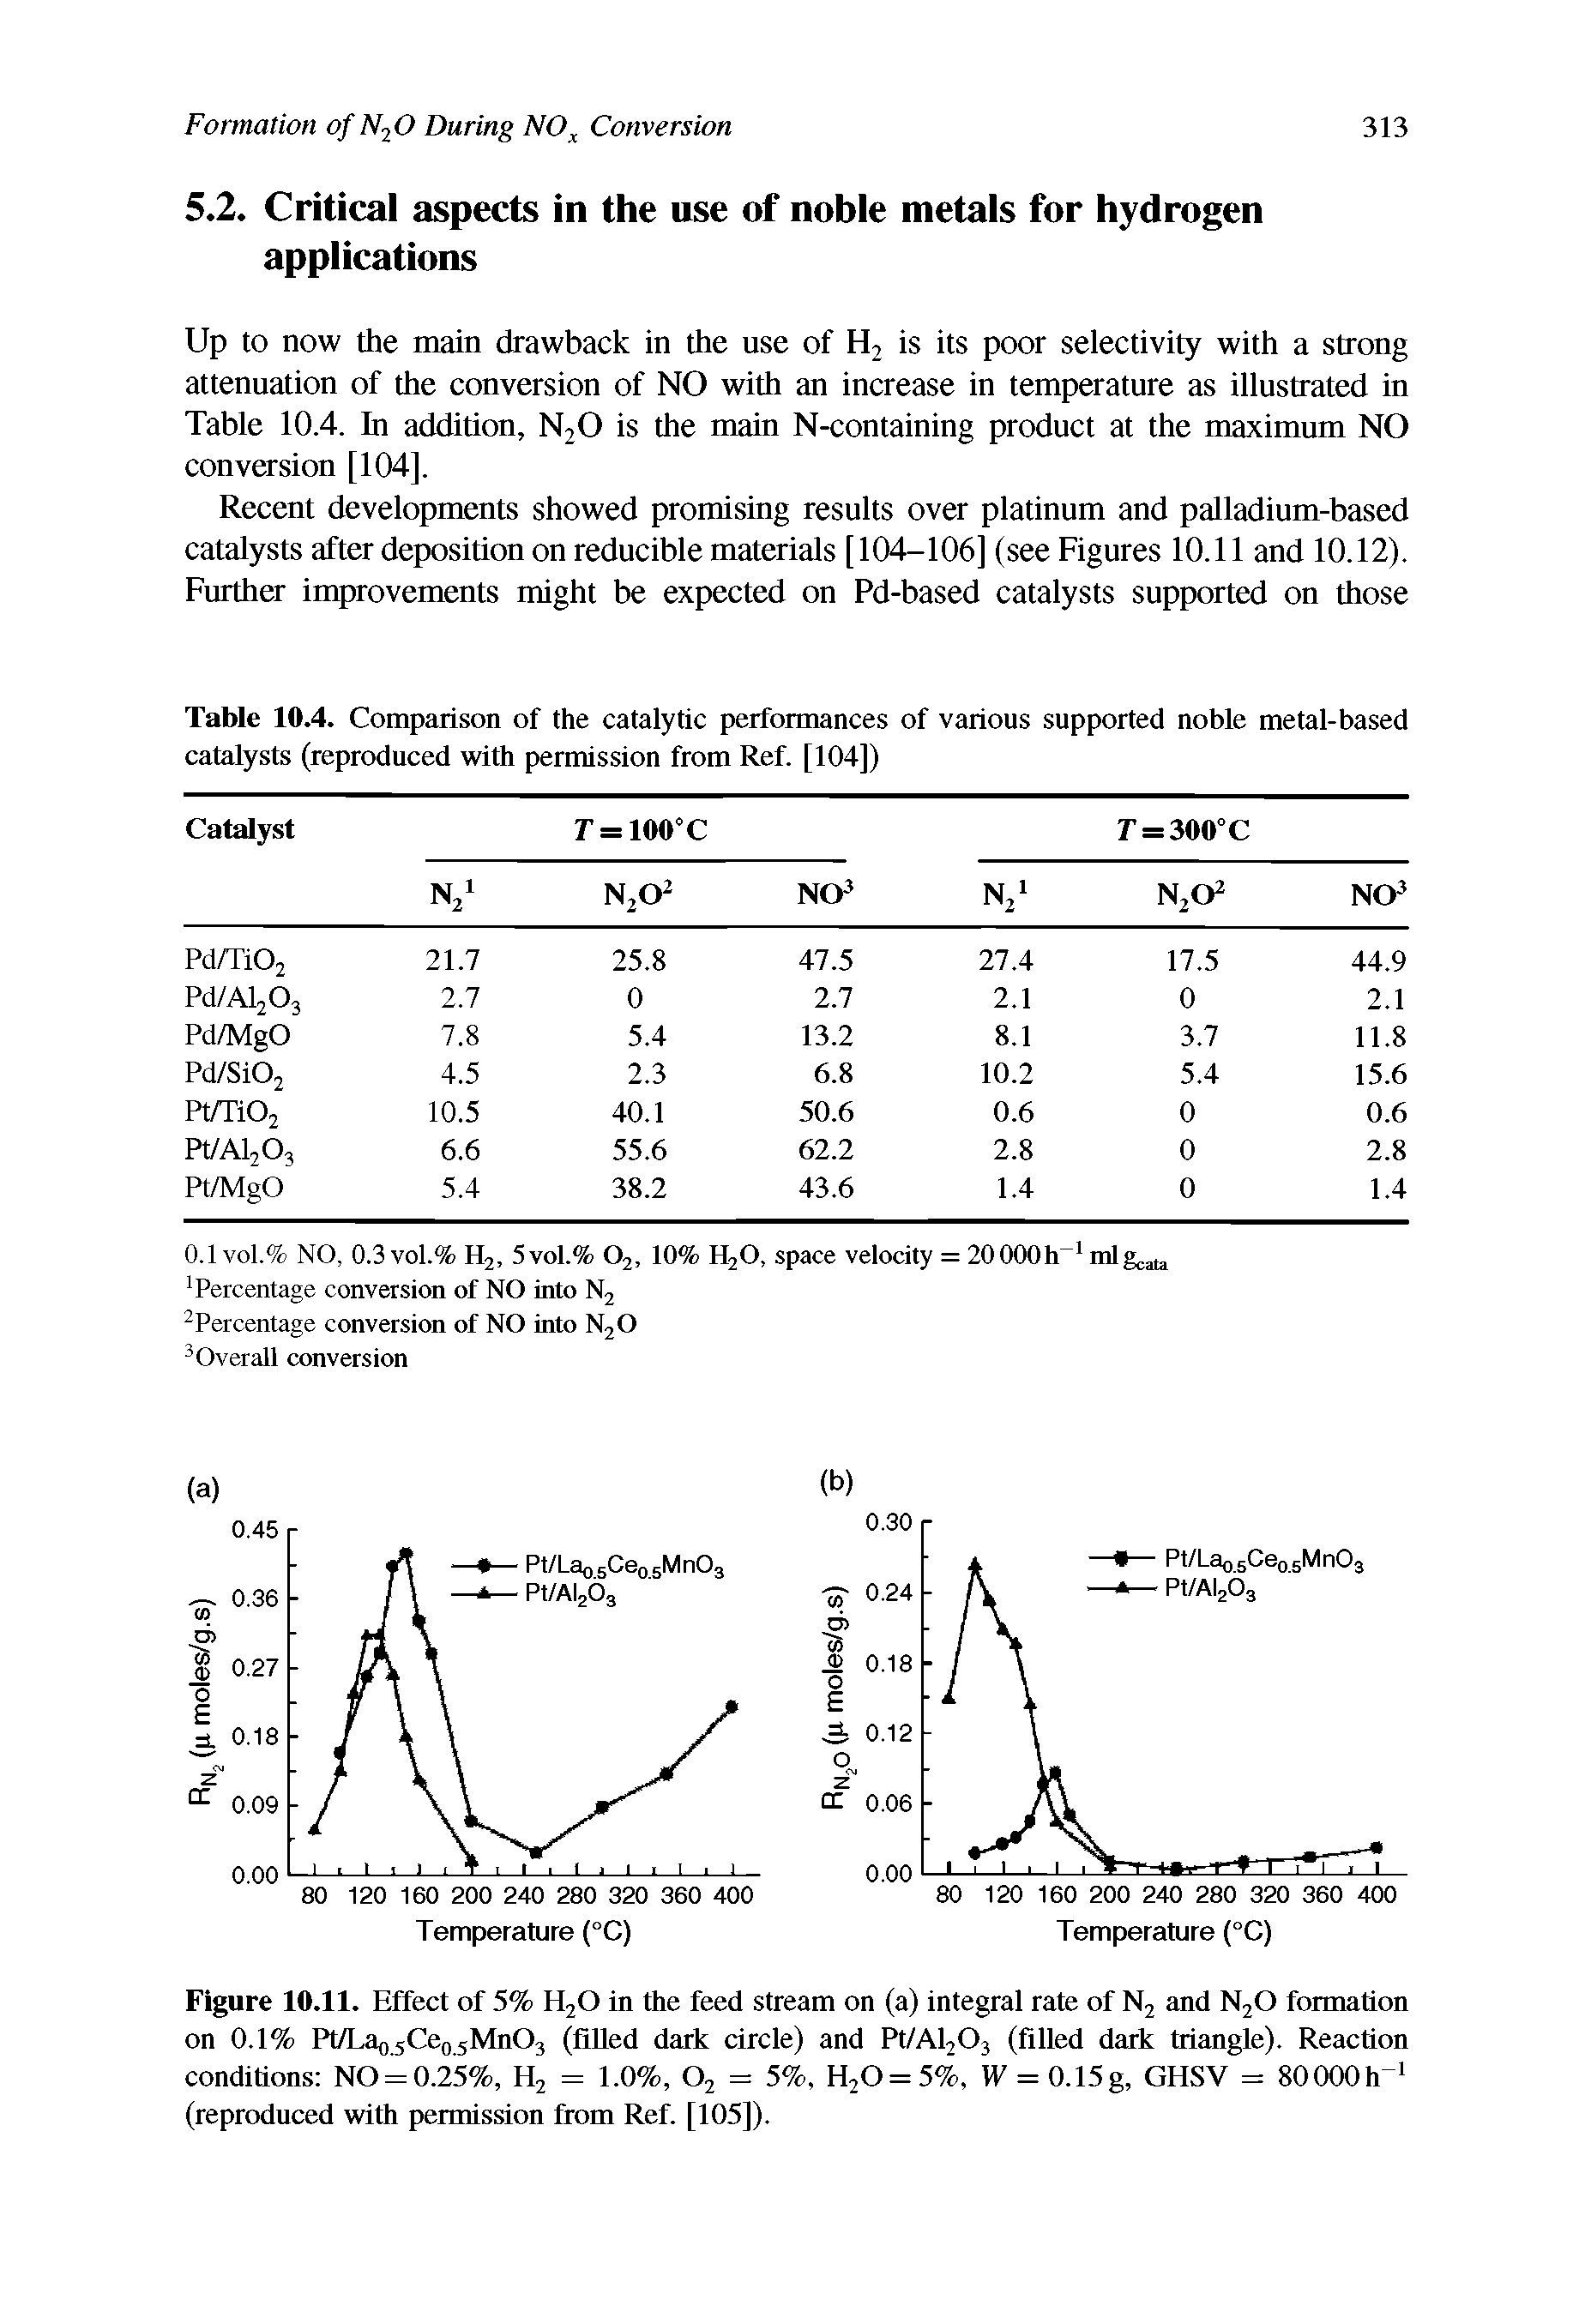 Table 10.4. Comparison of the catalytic performances of various supported noble metal-based catalysts (reproduced with permission from Ref. [104])...